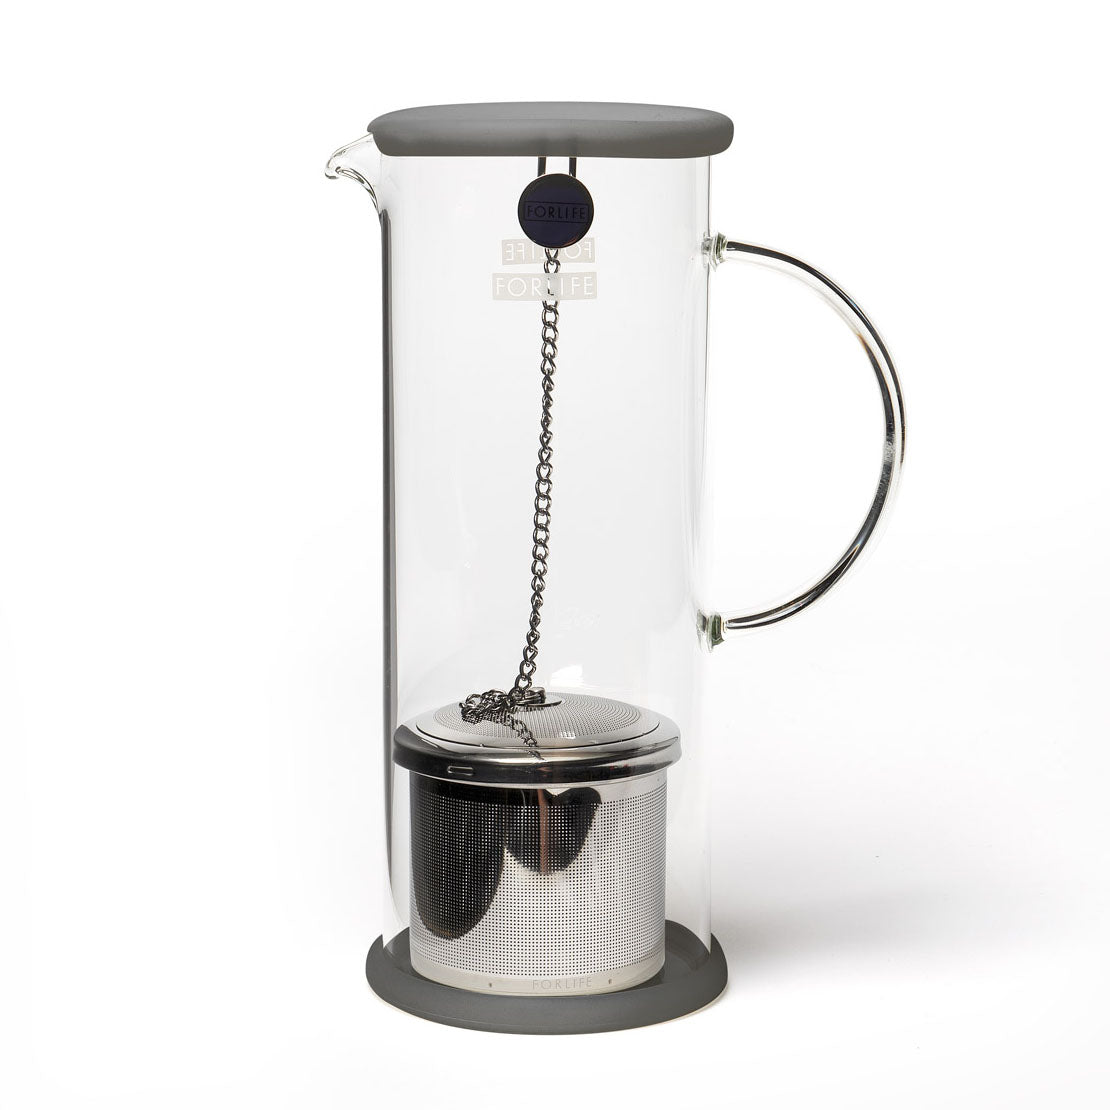 Mr. Coffee Iced Tea Maker Delivers Southern Tea in Minutes